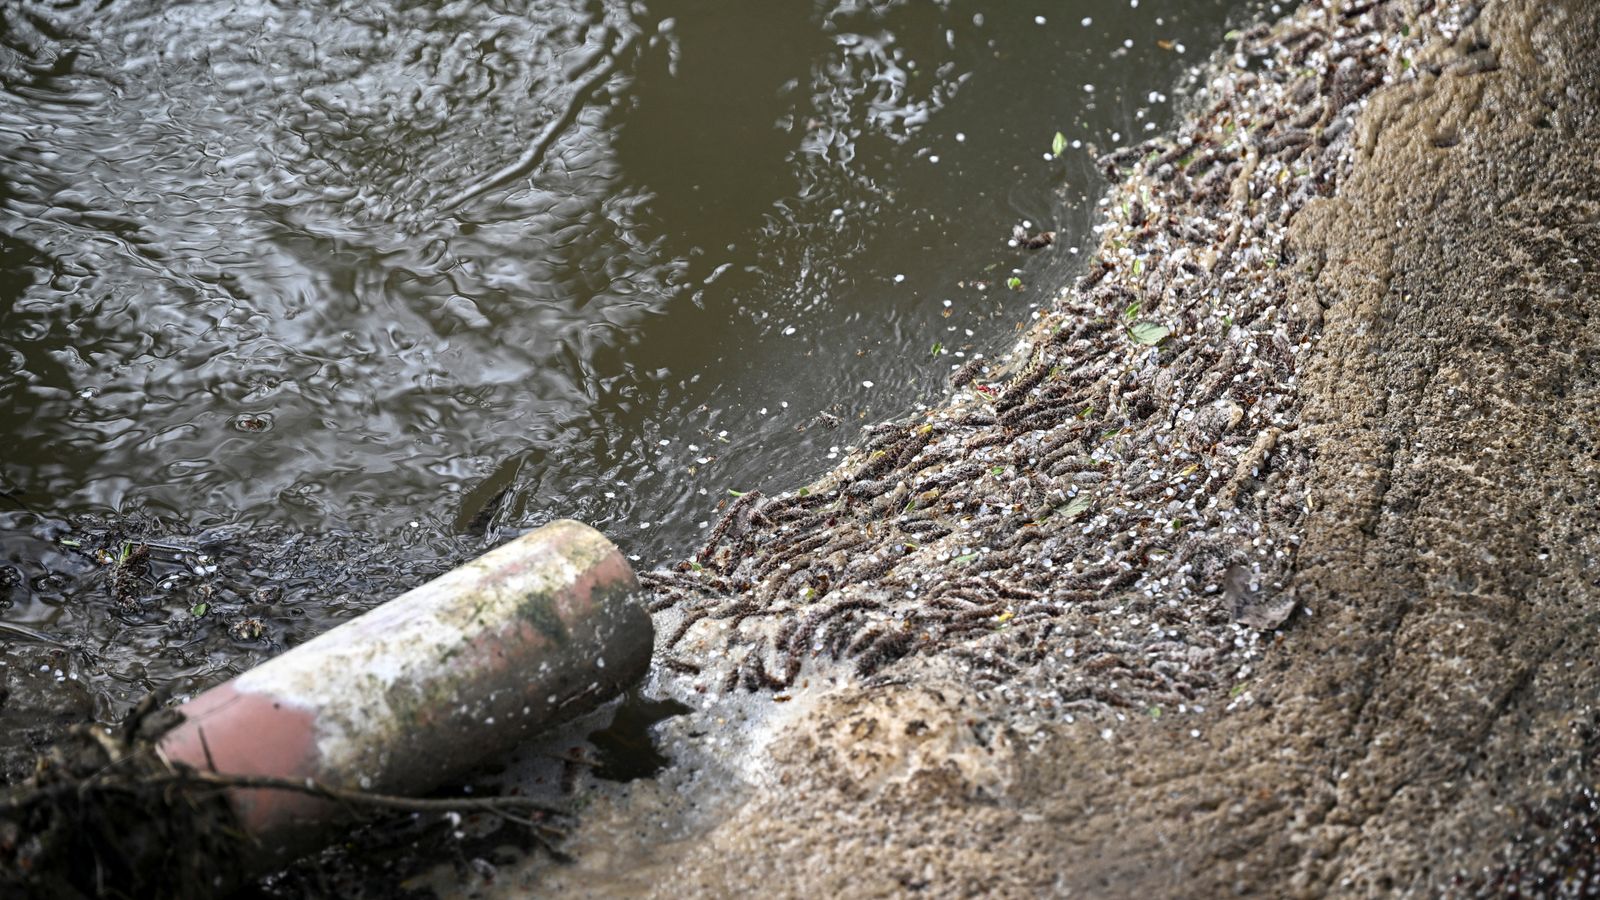 Faulty sewage spill monitors spark accusations of 'environmental cover up' by water firms